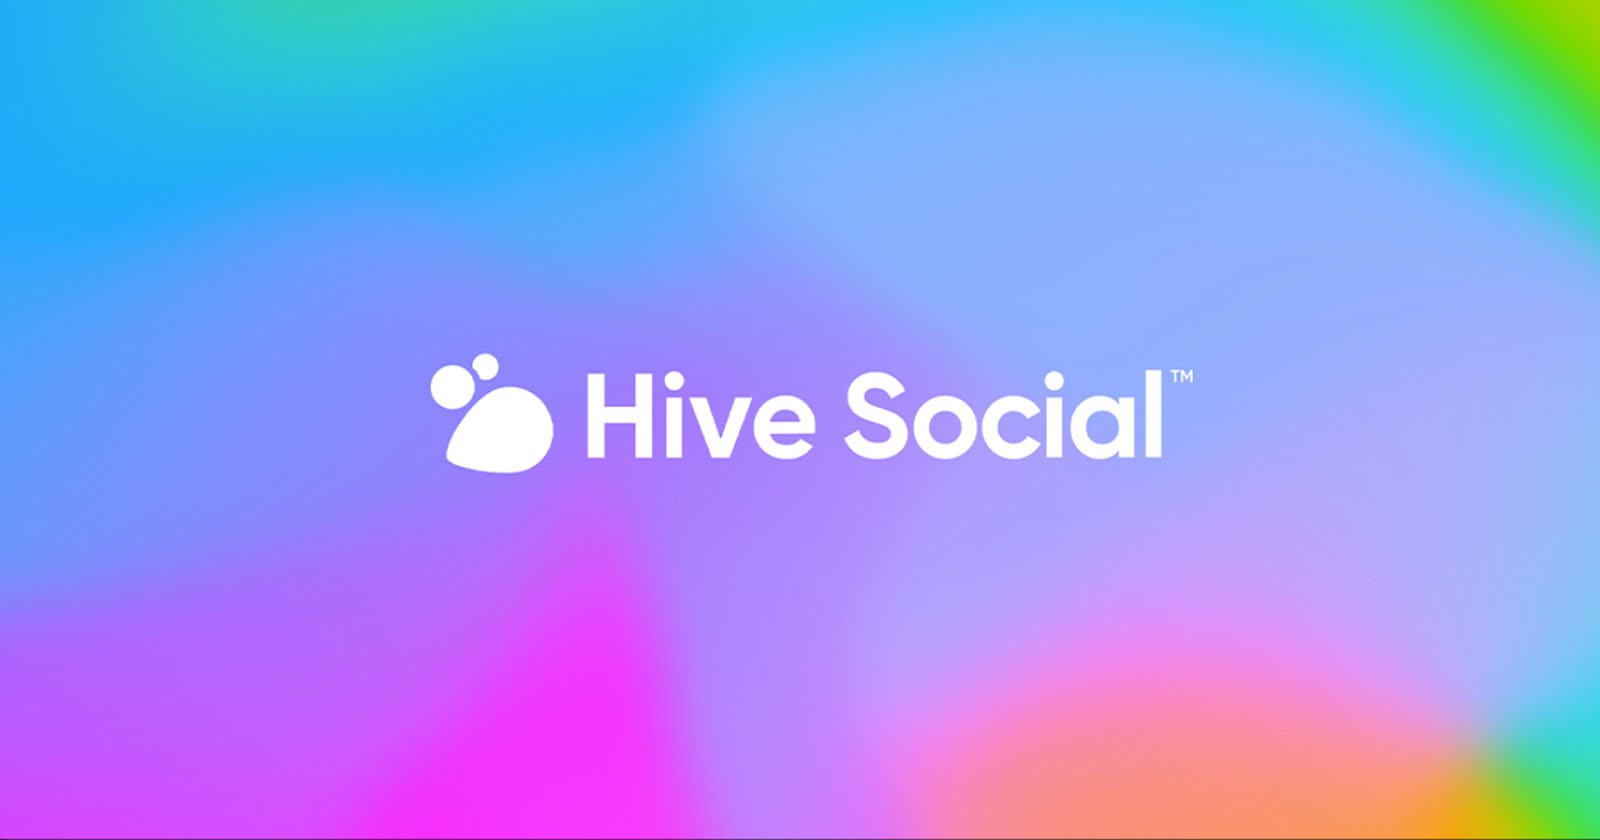 Hive Social is Back Online, Two Weeks After Security Issues Shut It Down